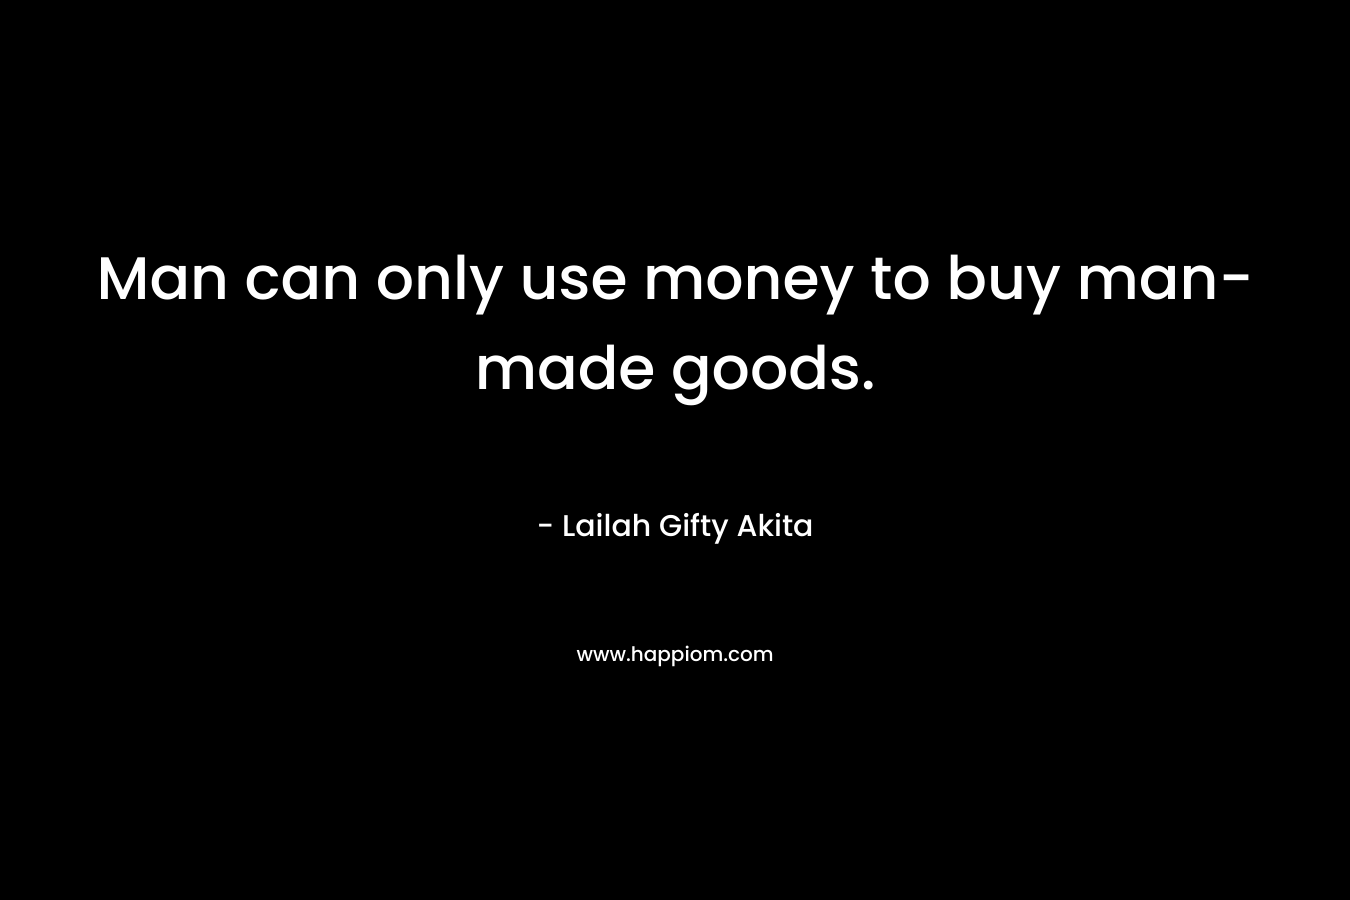 Man can only use money to buy man-made goods.